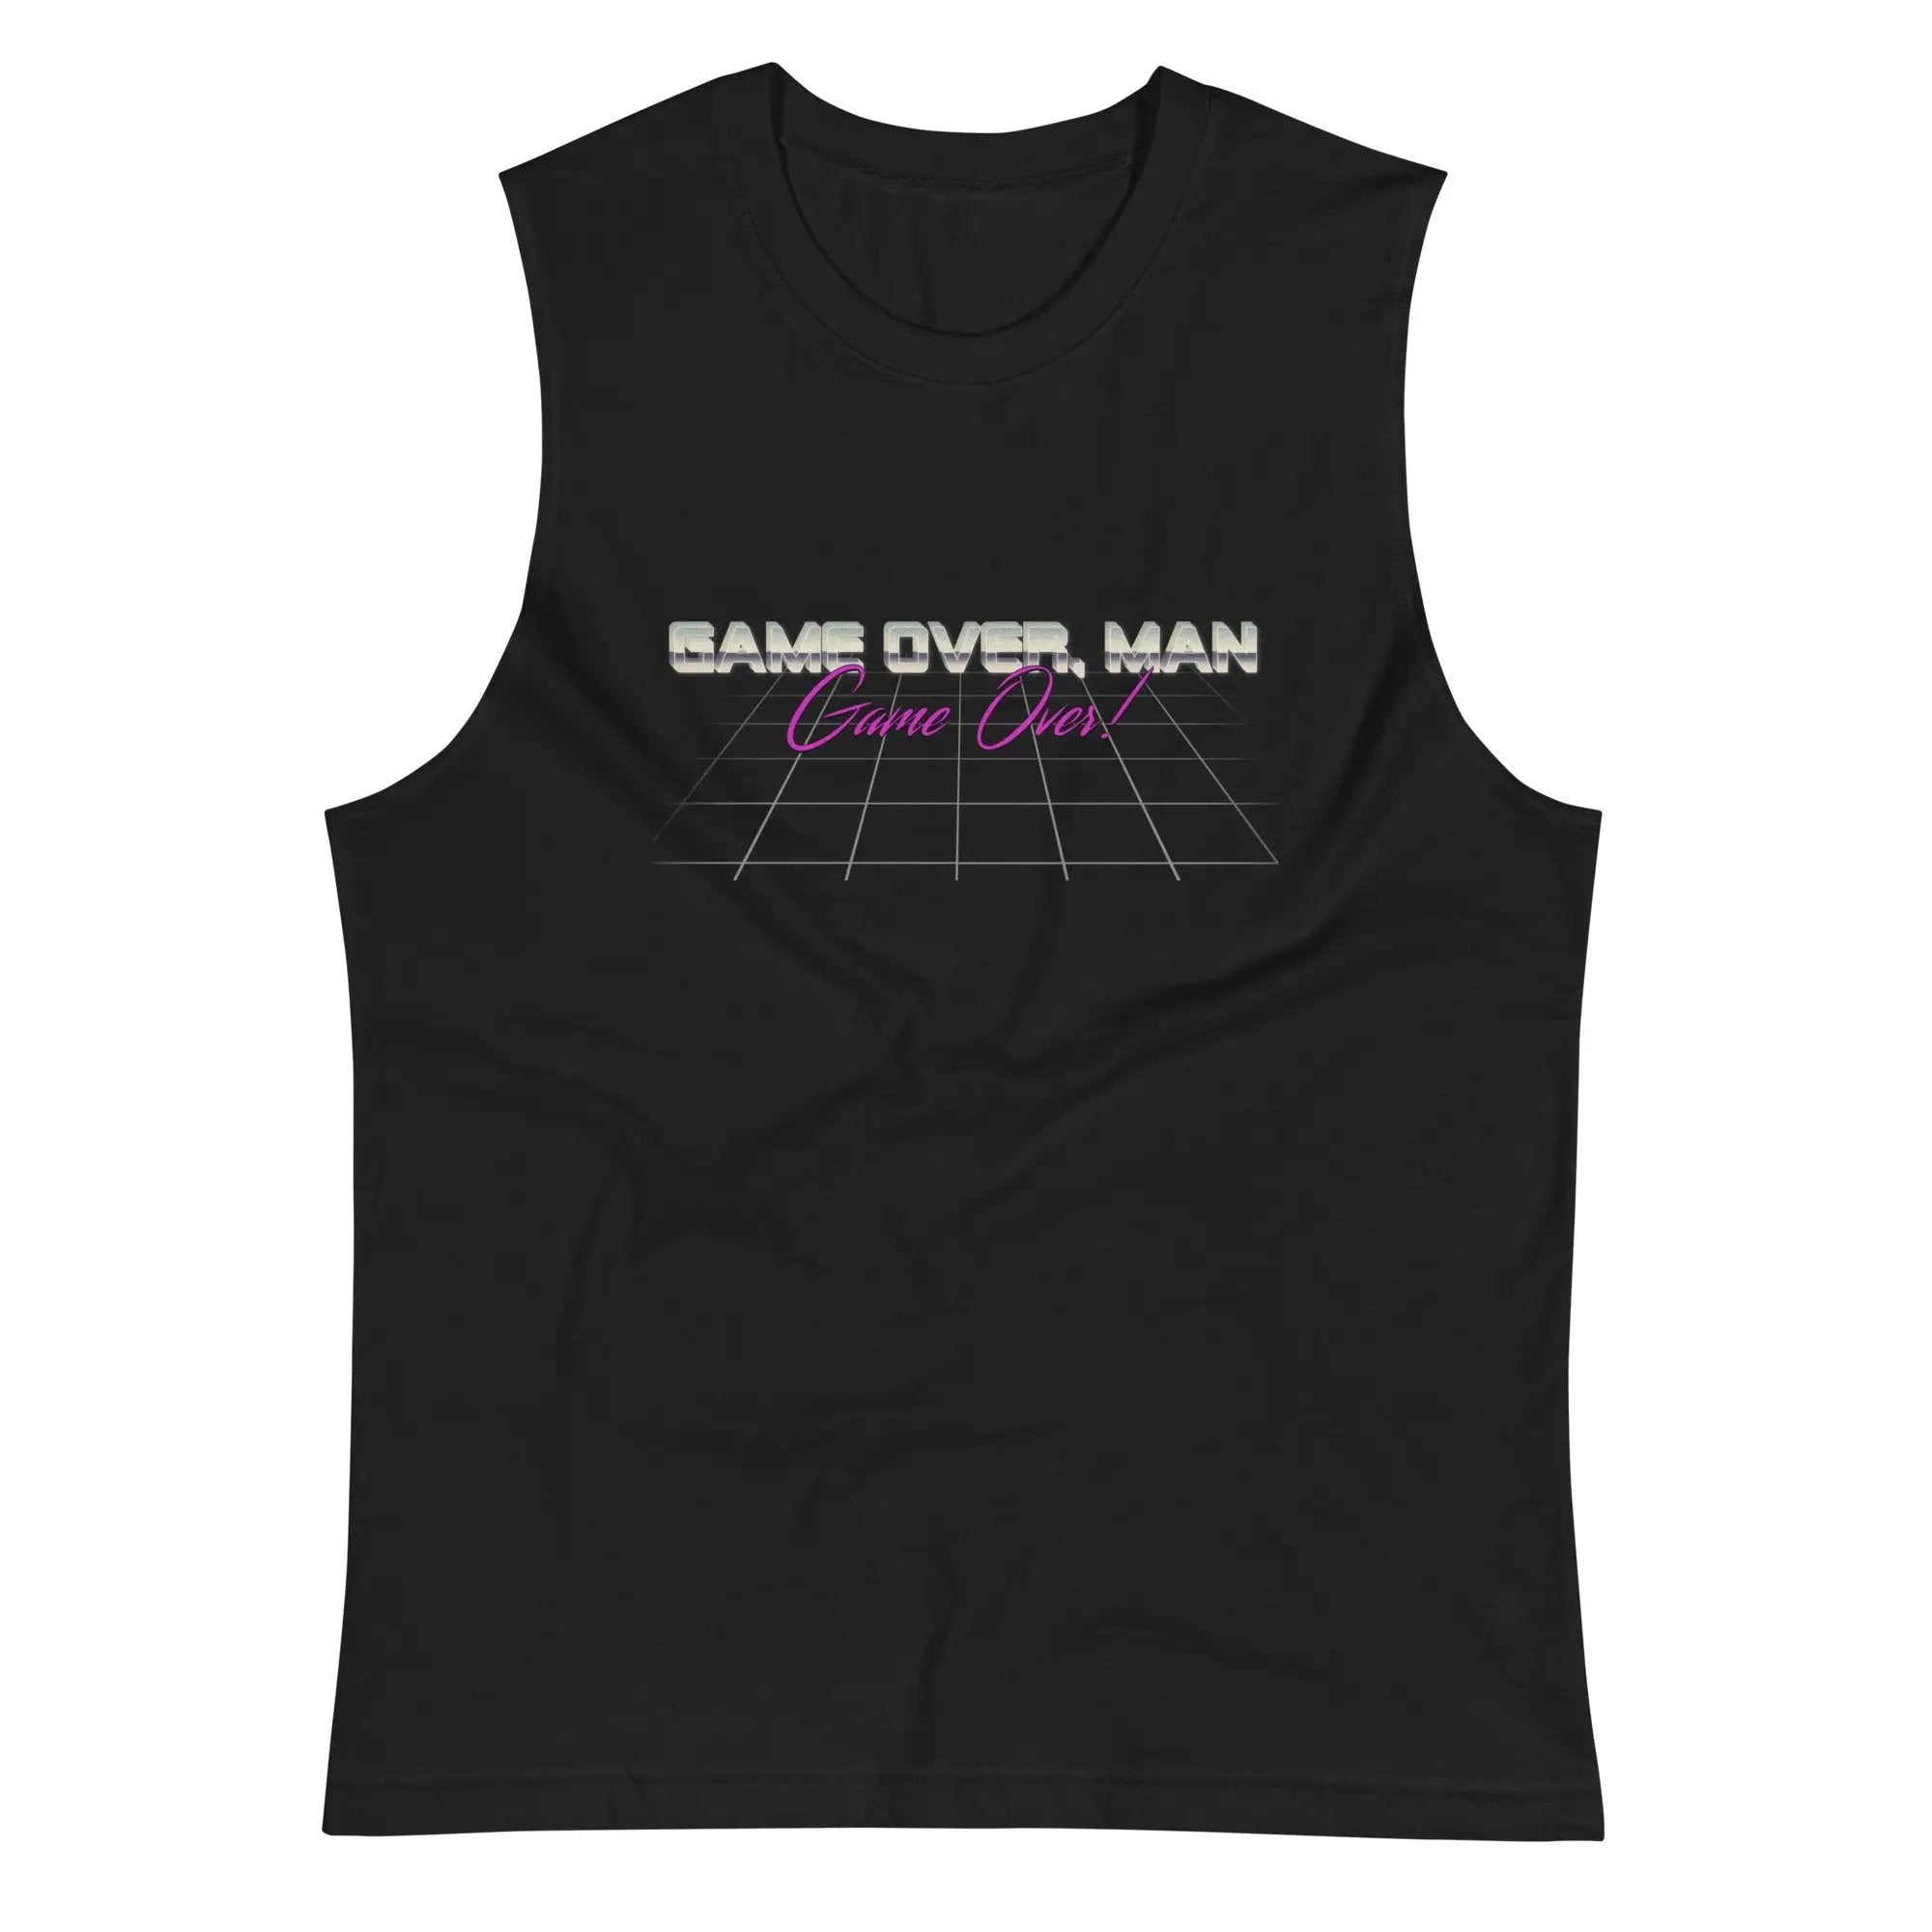 a black tank top with the words same over man on it